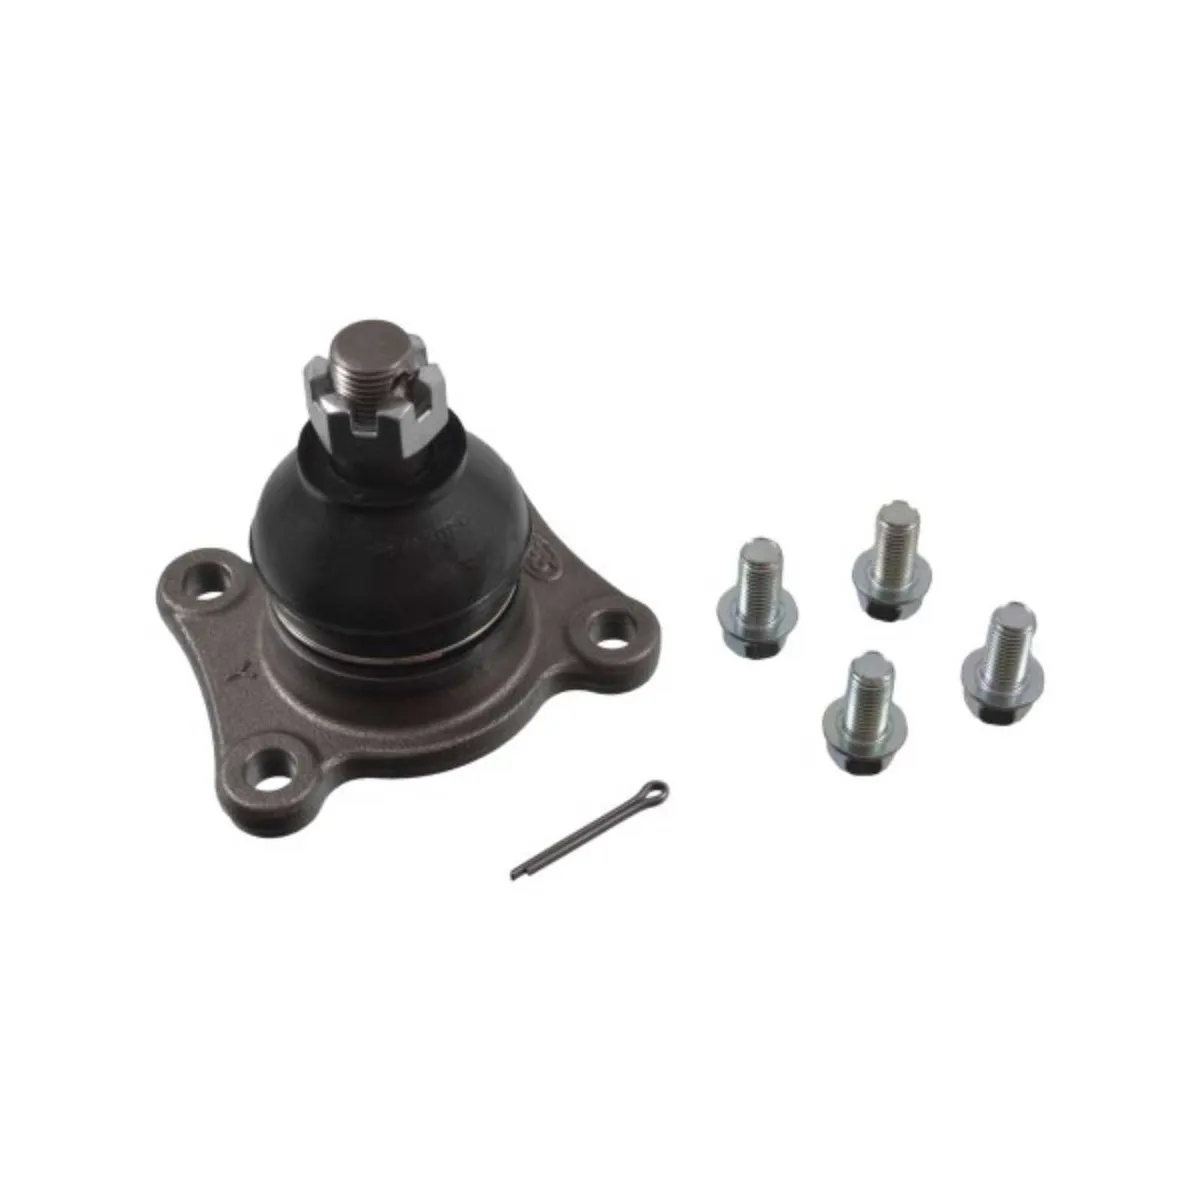 Toyota Hilux 1989-2005 Ball Joints - Image 1